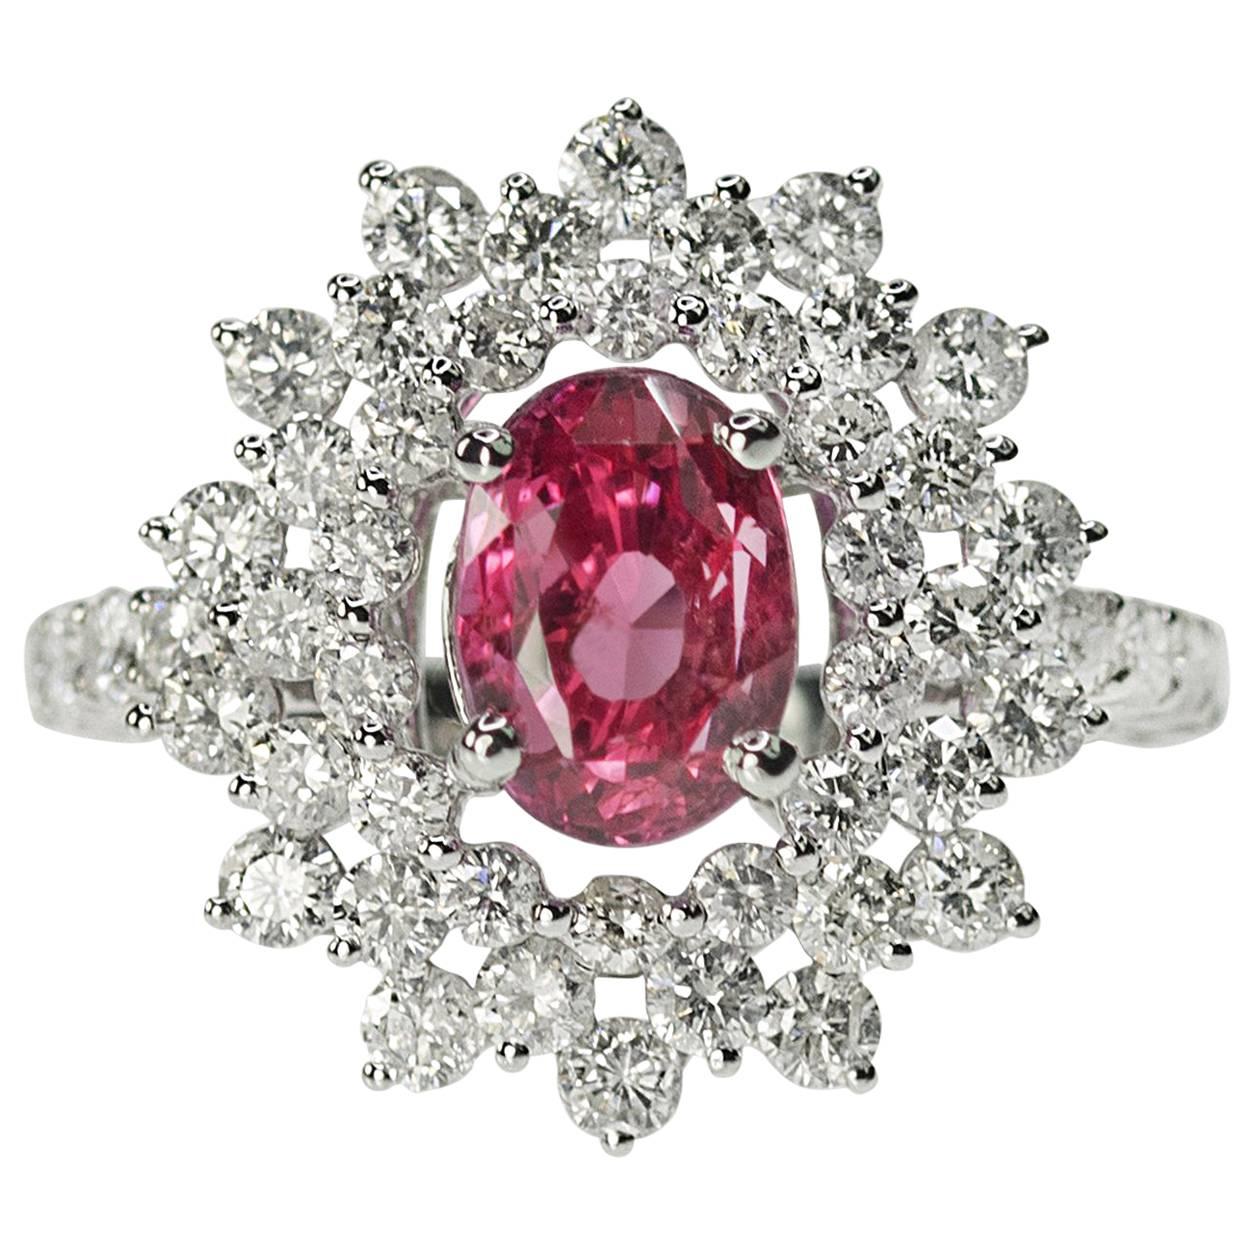 Unheated Ceylon Pink Sapphire Ring For Sale